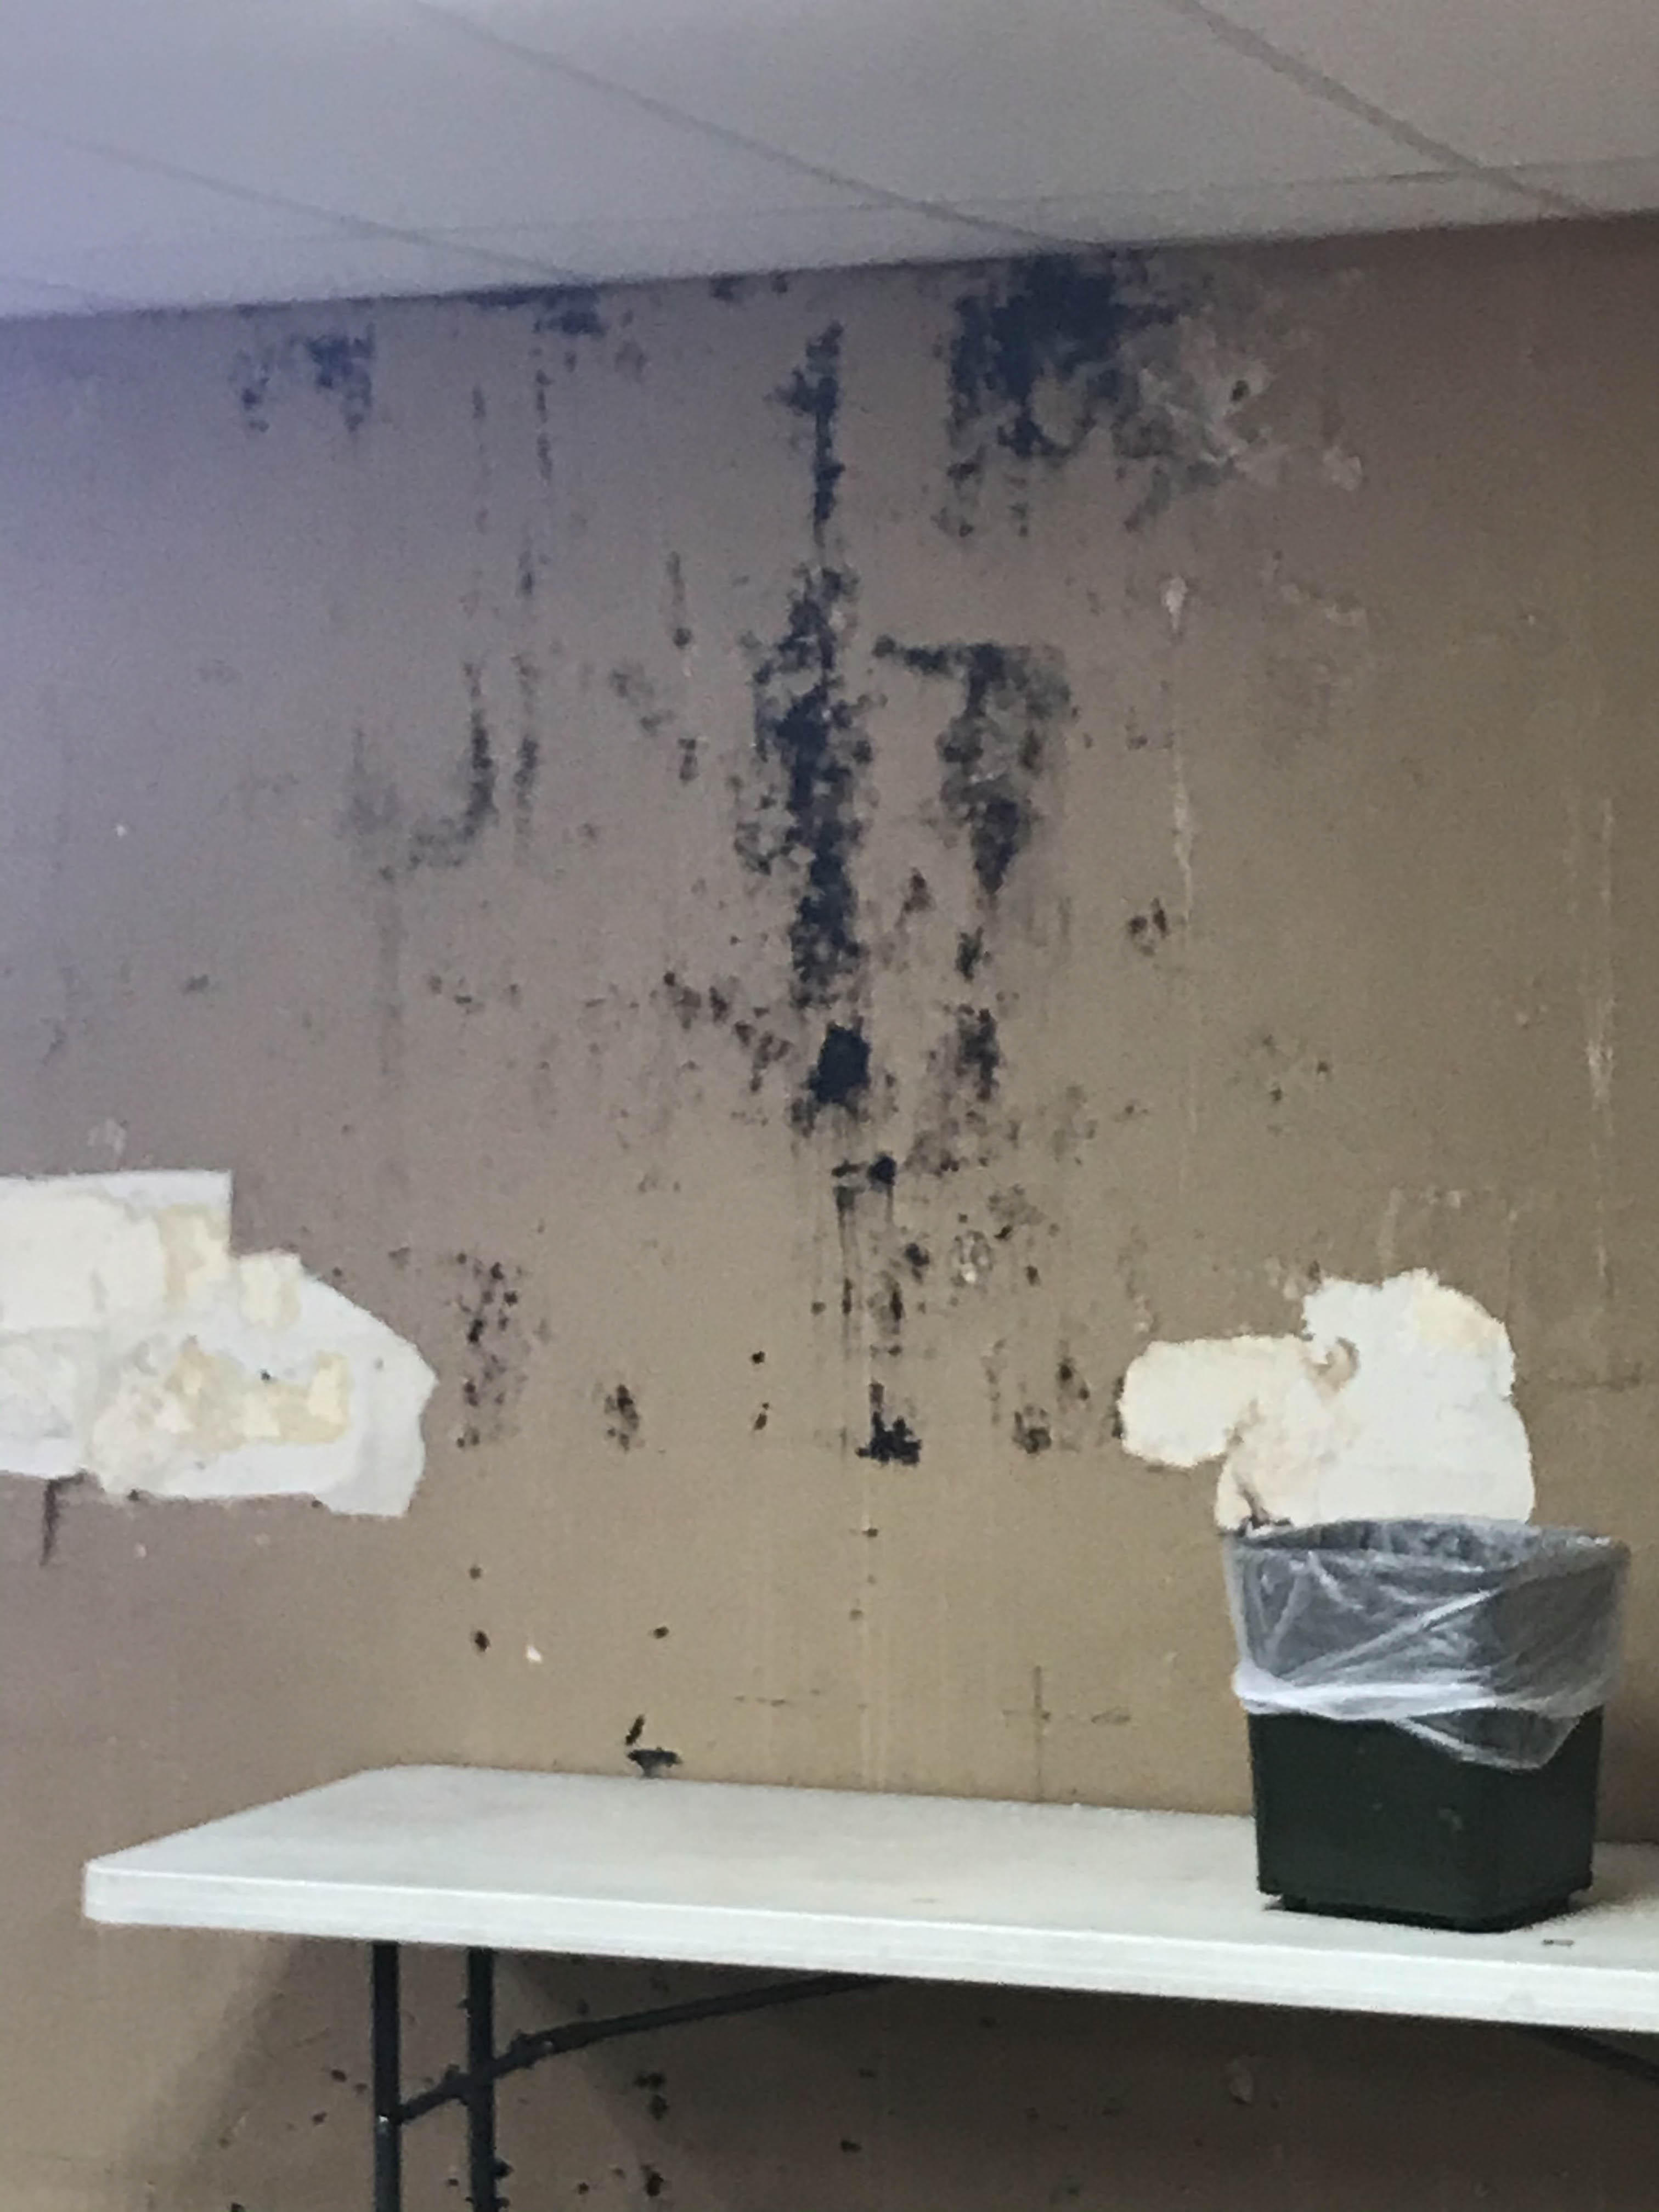 Any mold in your home or business should be treated with caution. Our SERVPRO of Tyler Professionals are certified and skilled in mold remediation. 

The state of Texas regulates businesses testing and cleanup for mold.